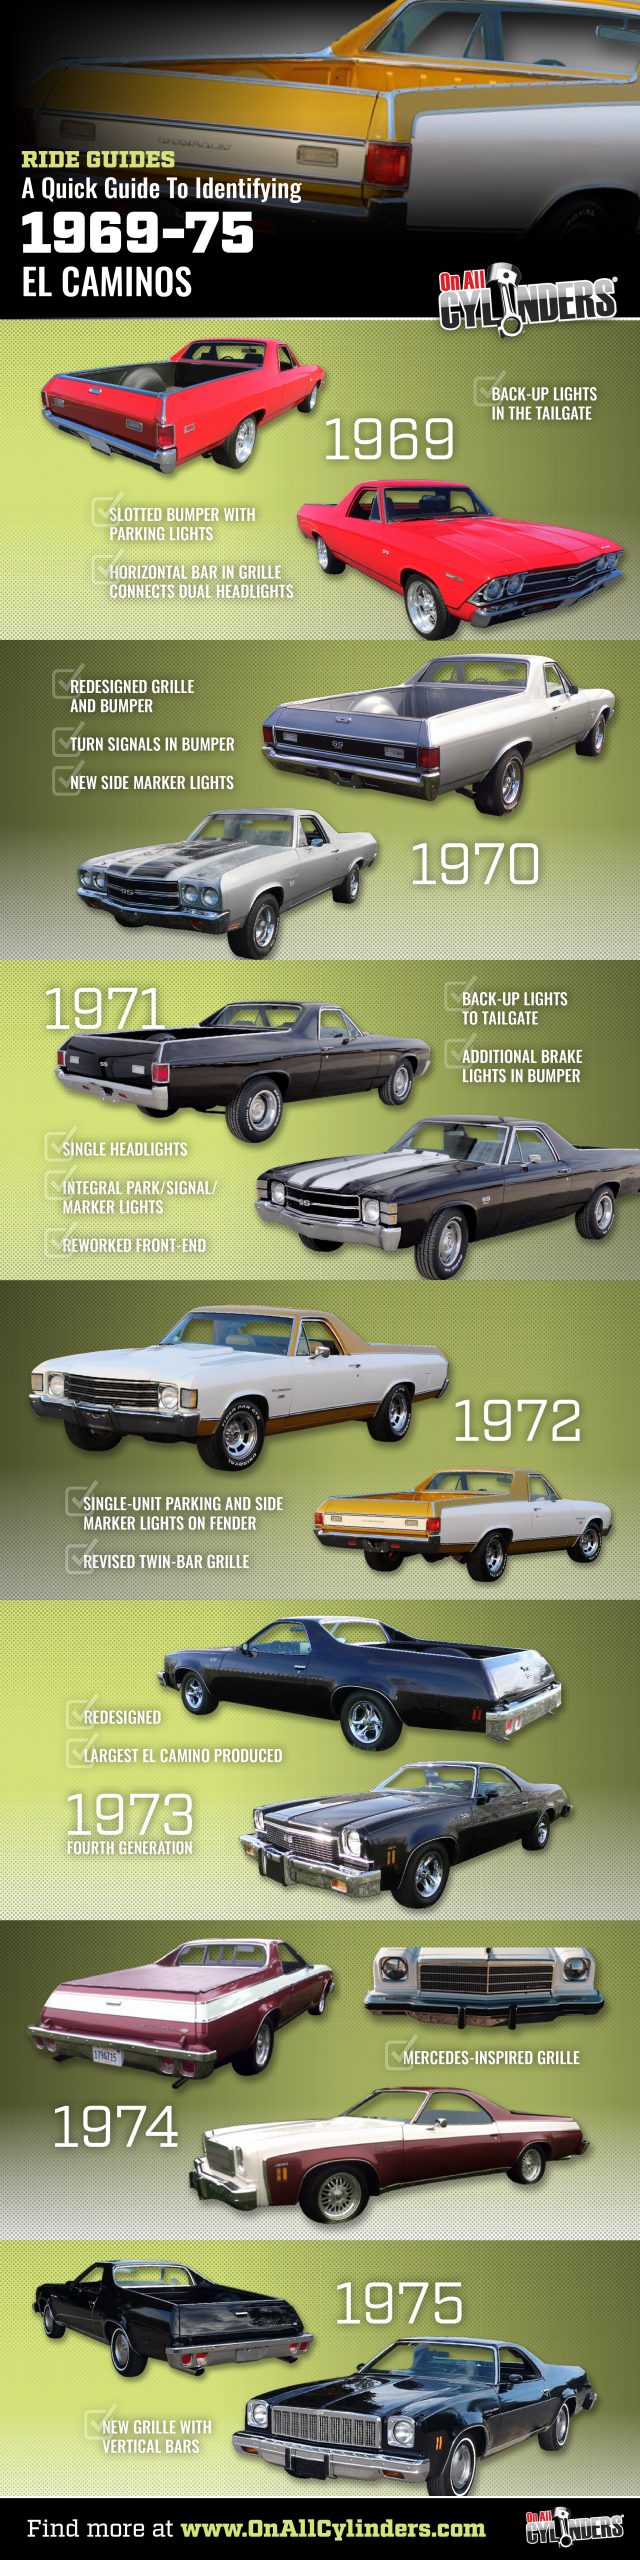 Ride Guides A Quick Guide To Identifying Chevy El Camino Model Years